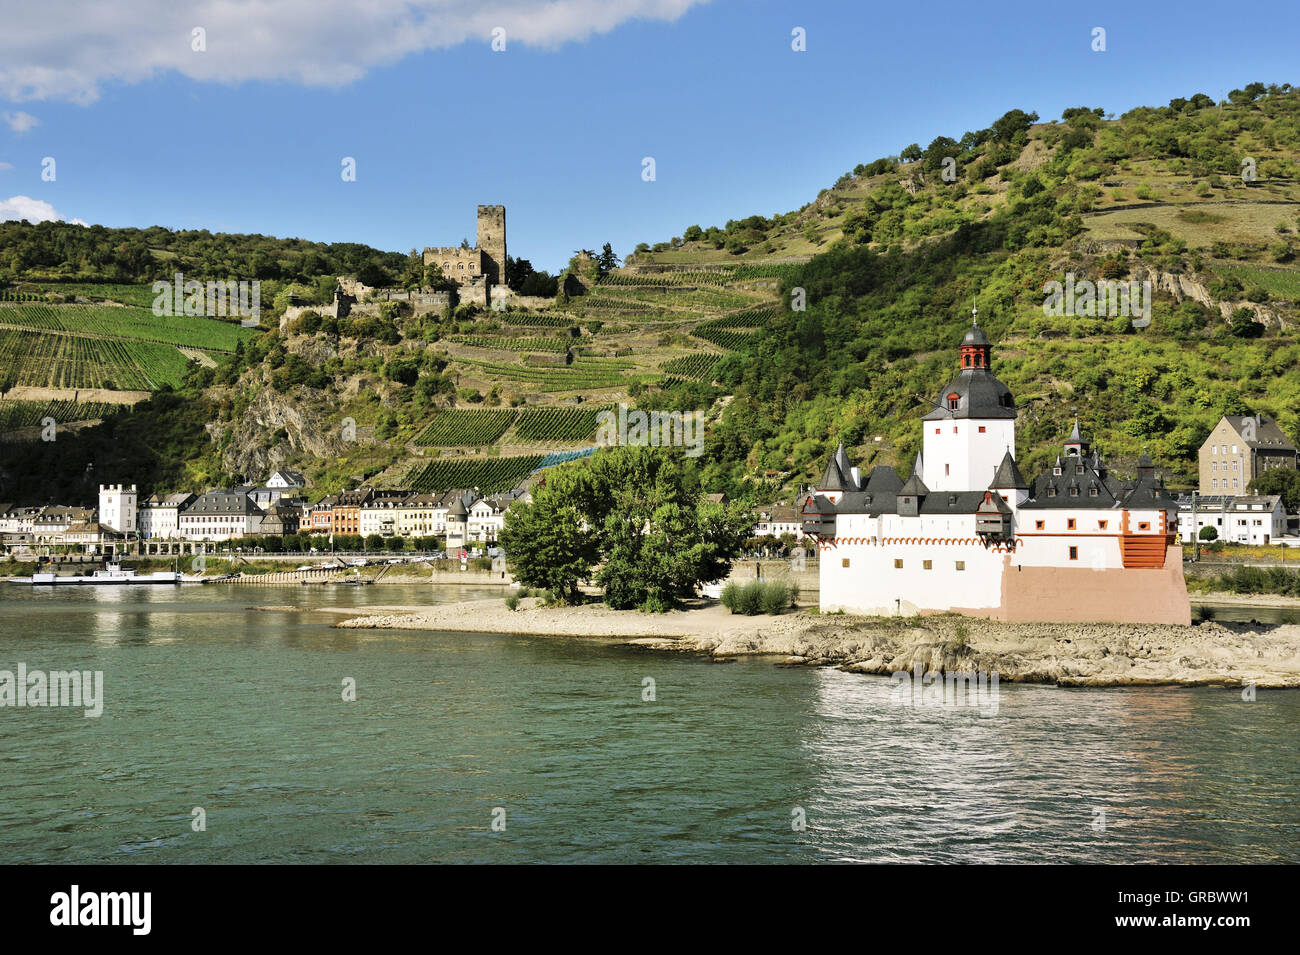 Pfalzgrafenstein Castle, Toll Castle In Middle Of The Rhine, Town Kaub And Gutenfels Castle In The Background, Upper Middle Rhine Valley, Germany Stock Photo